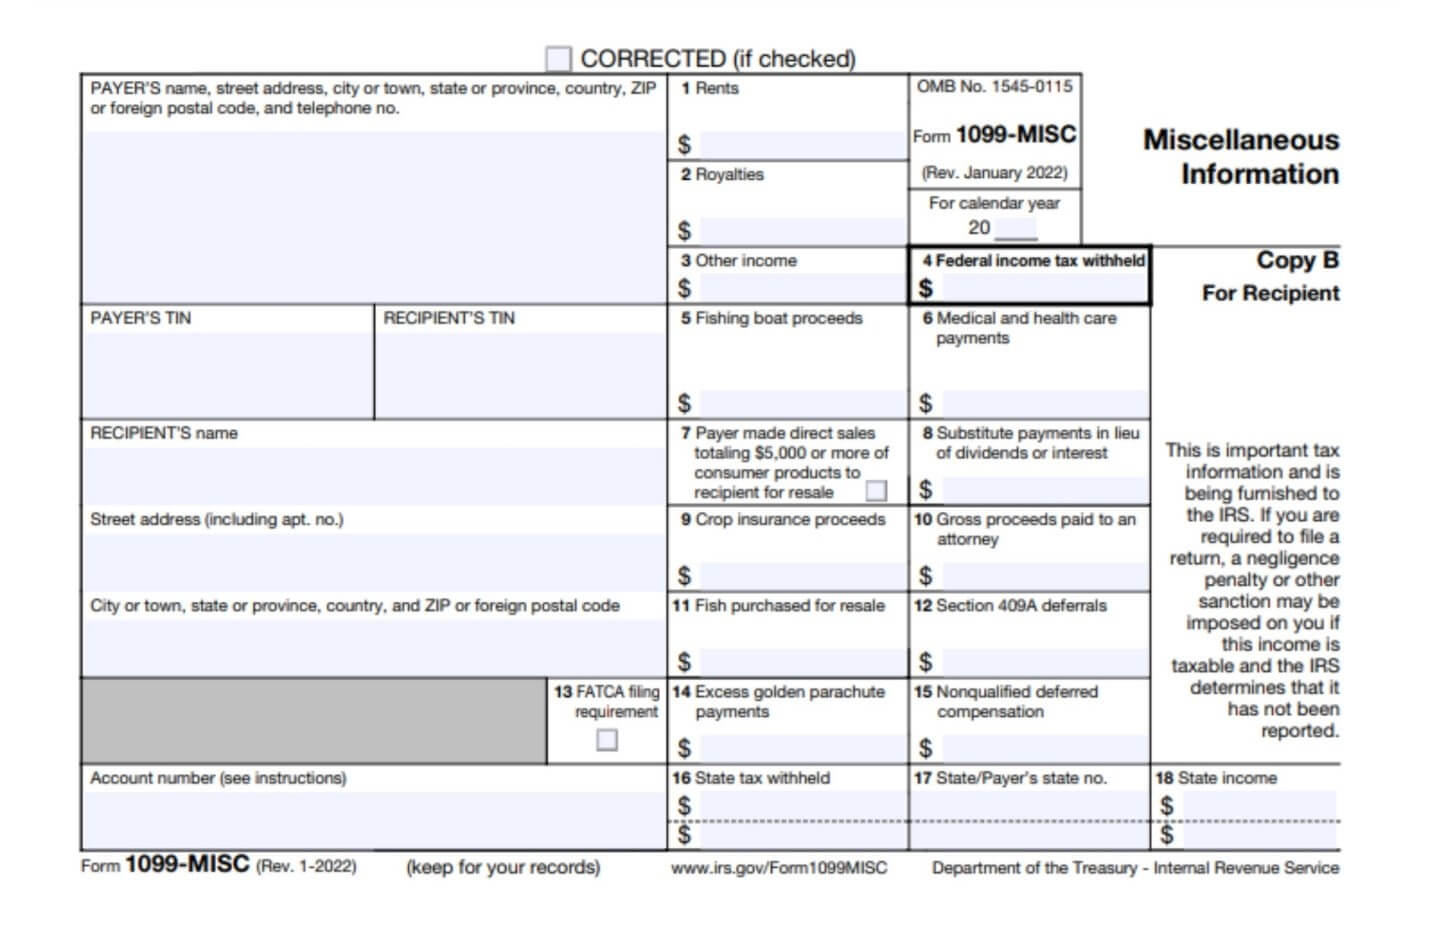 irs form 1099 MISC example